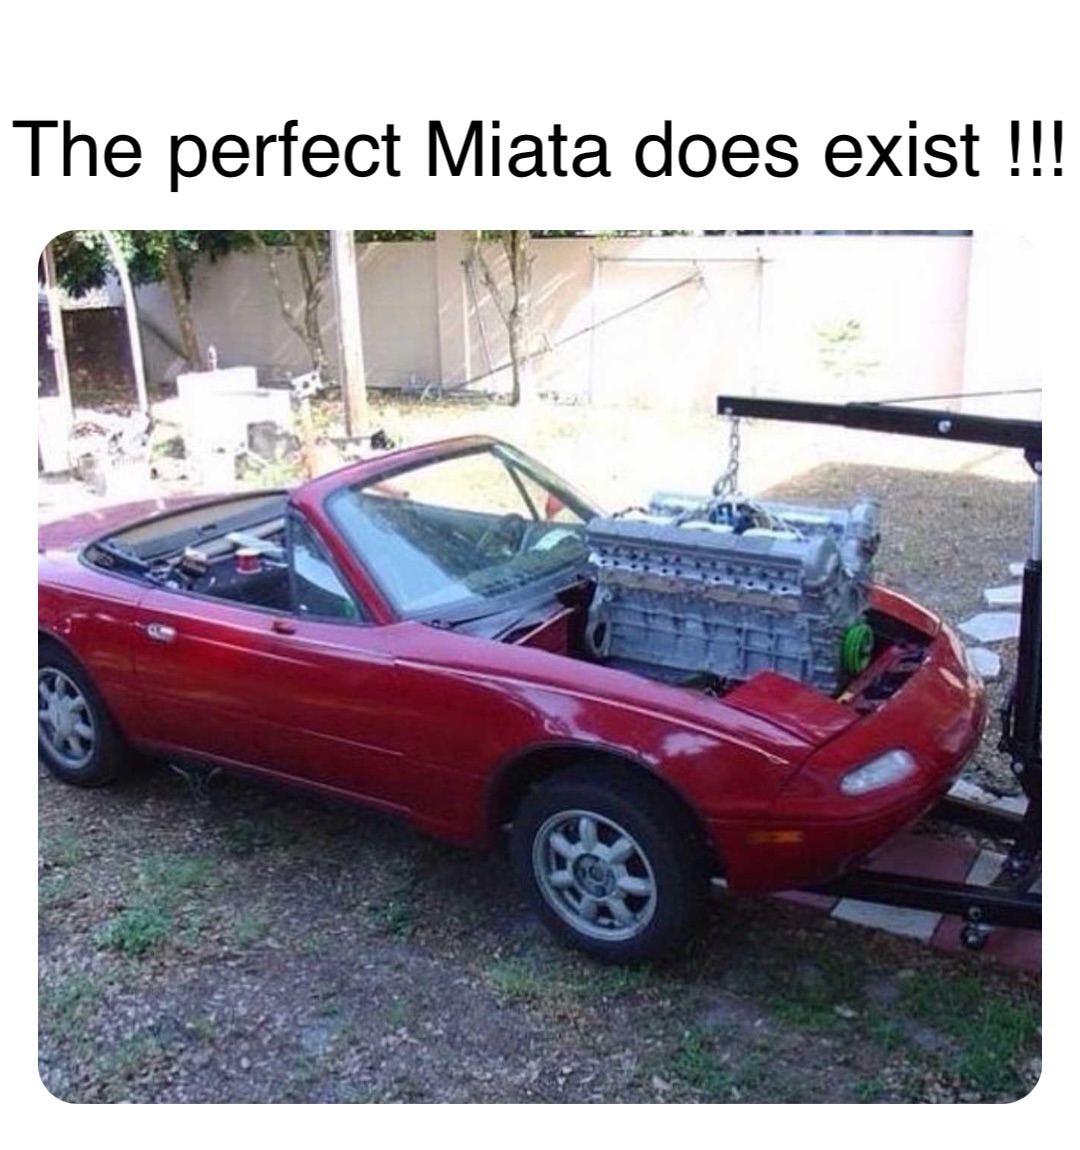 Double tap to edit The perfect Miata does exist !!!